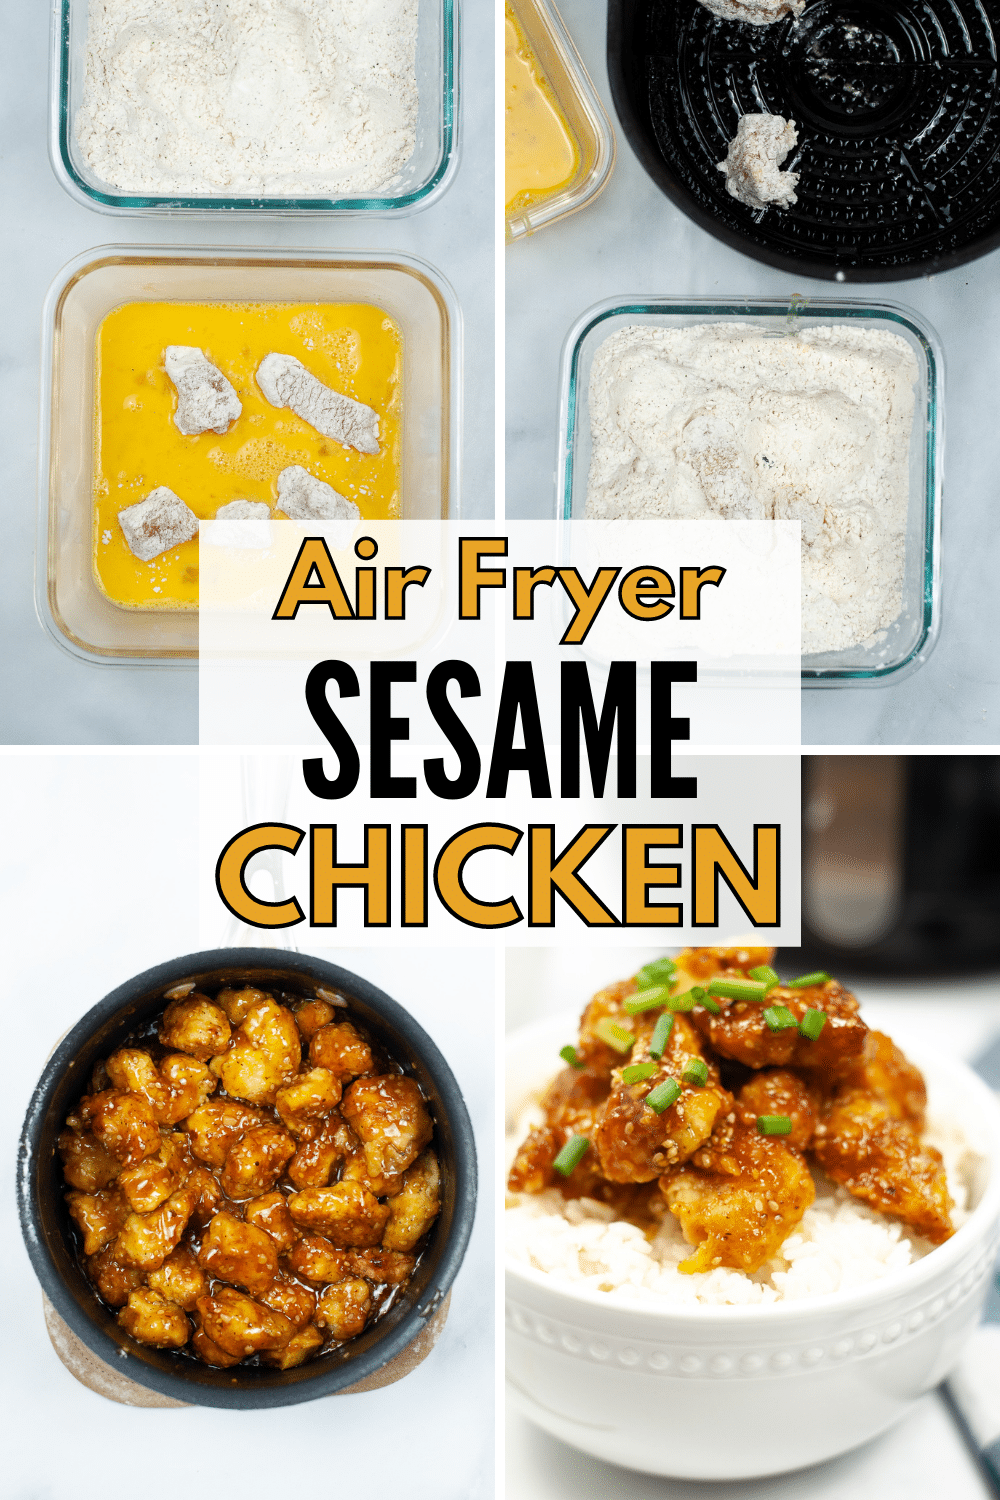 Air Fryer Sesame Chicken is so easy to make, you can whip up a batch any night of the week. It’s also much healthier than getting takeout. #airfryer #sesamechicken #dinner #recipe #chicken via @wondermomwannab